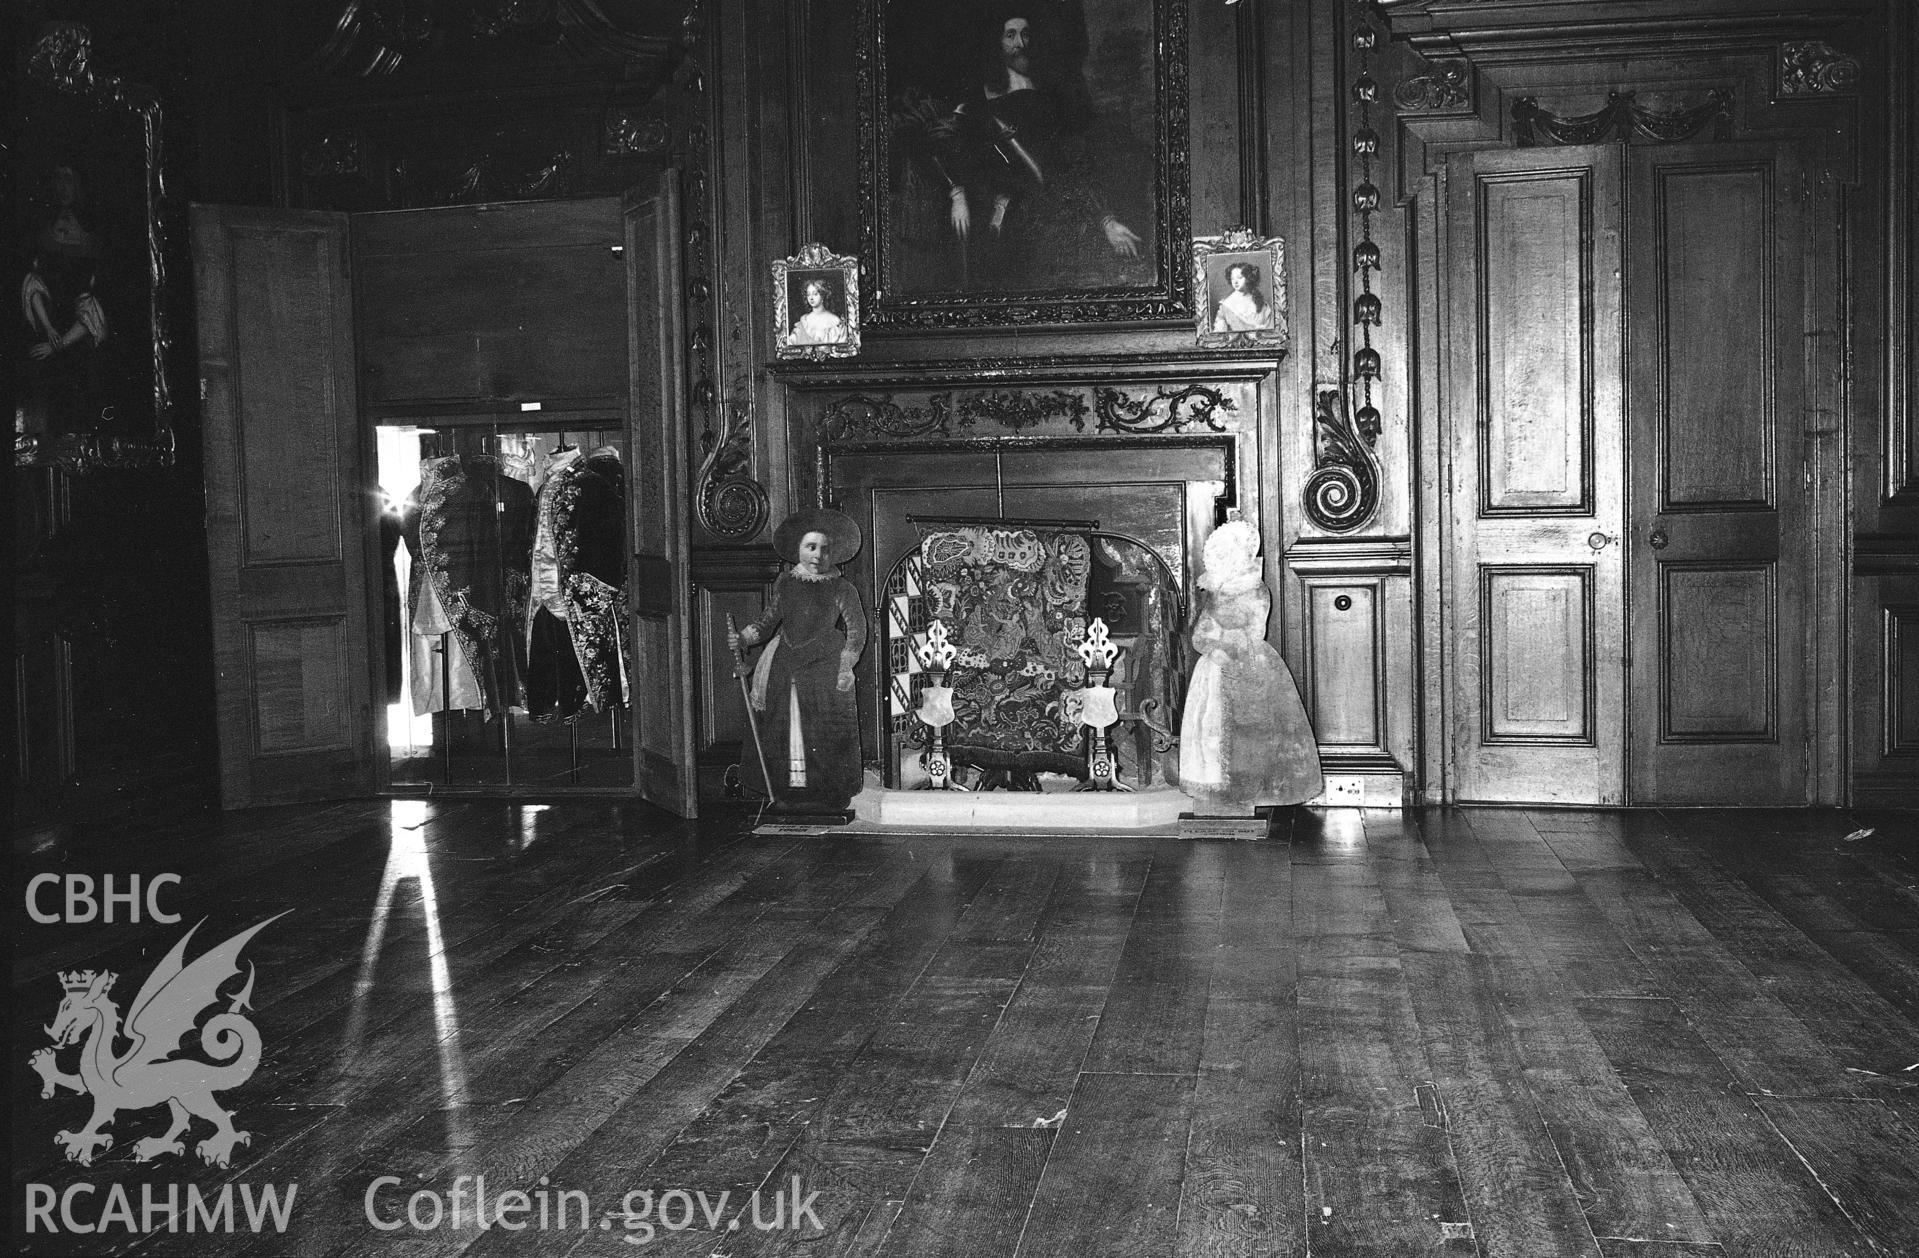 Interior view of Chirk Castle collated by the former Central Office of Information.